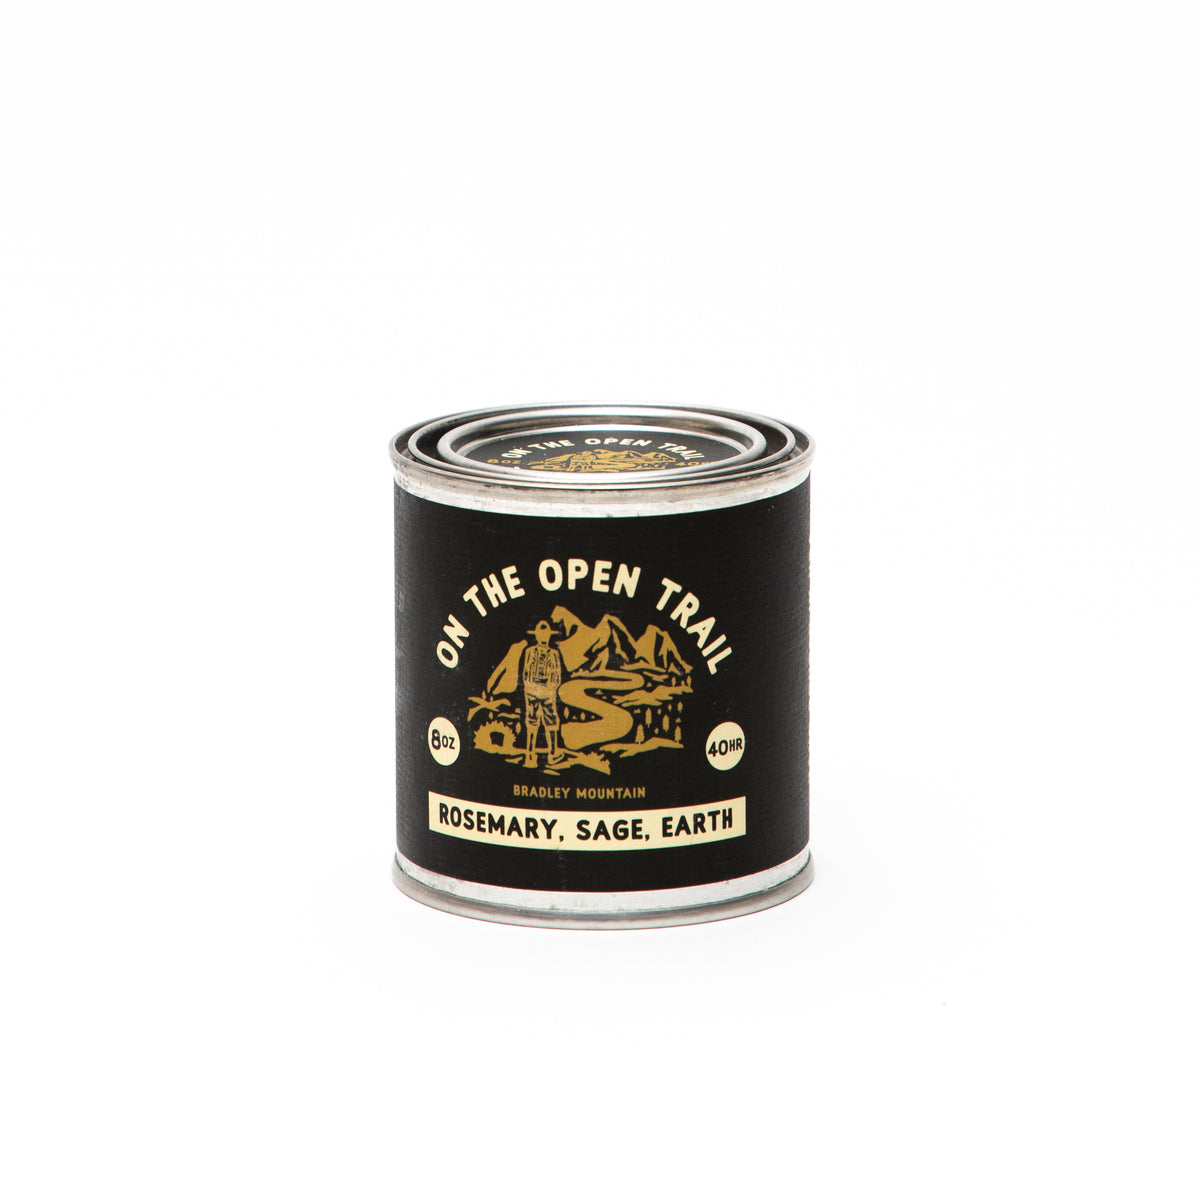 On The Open Trail Travel Candle